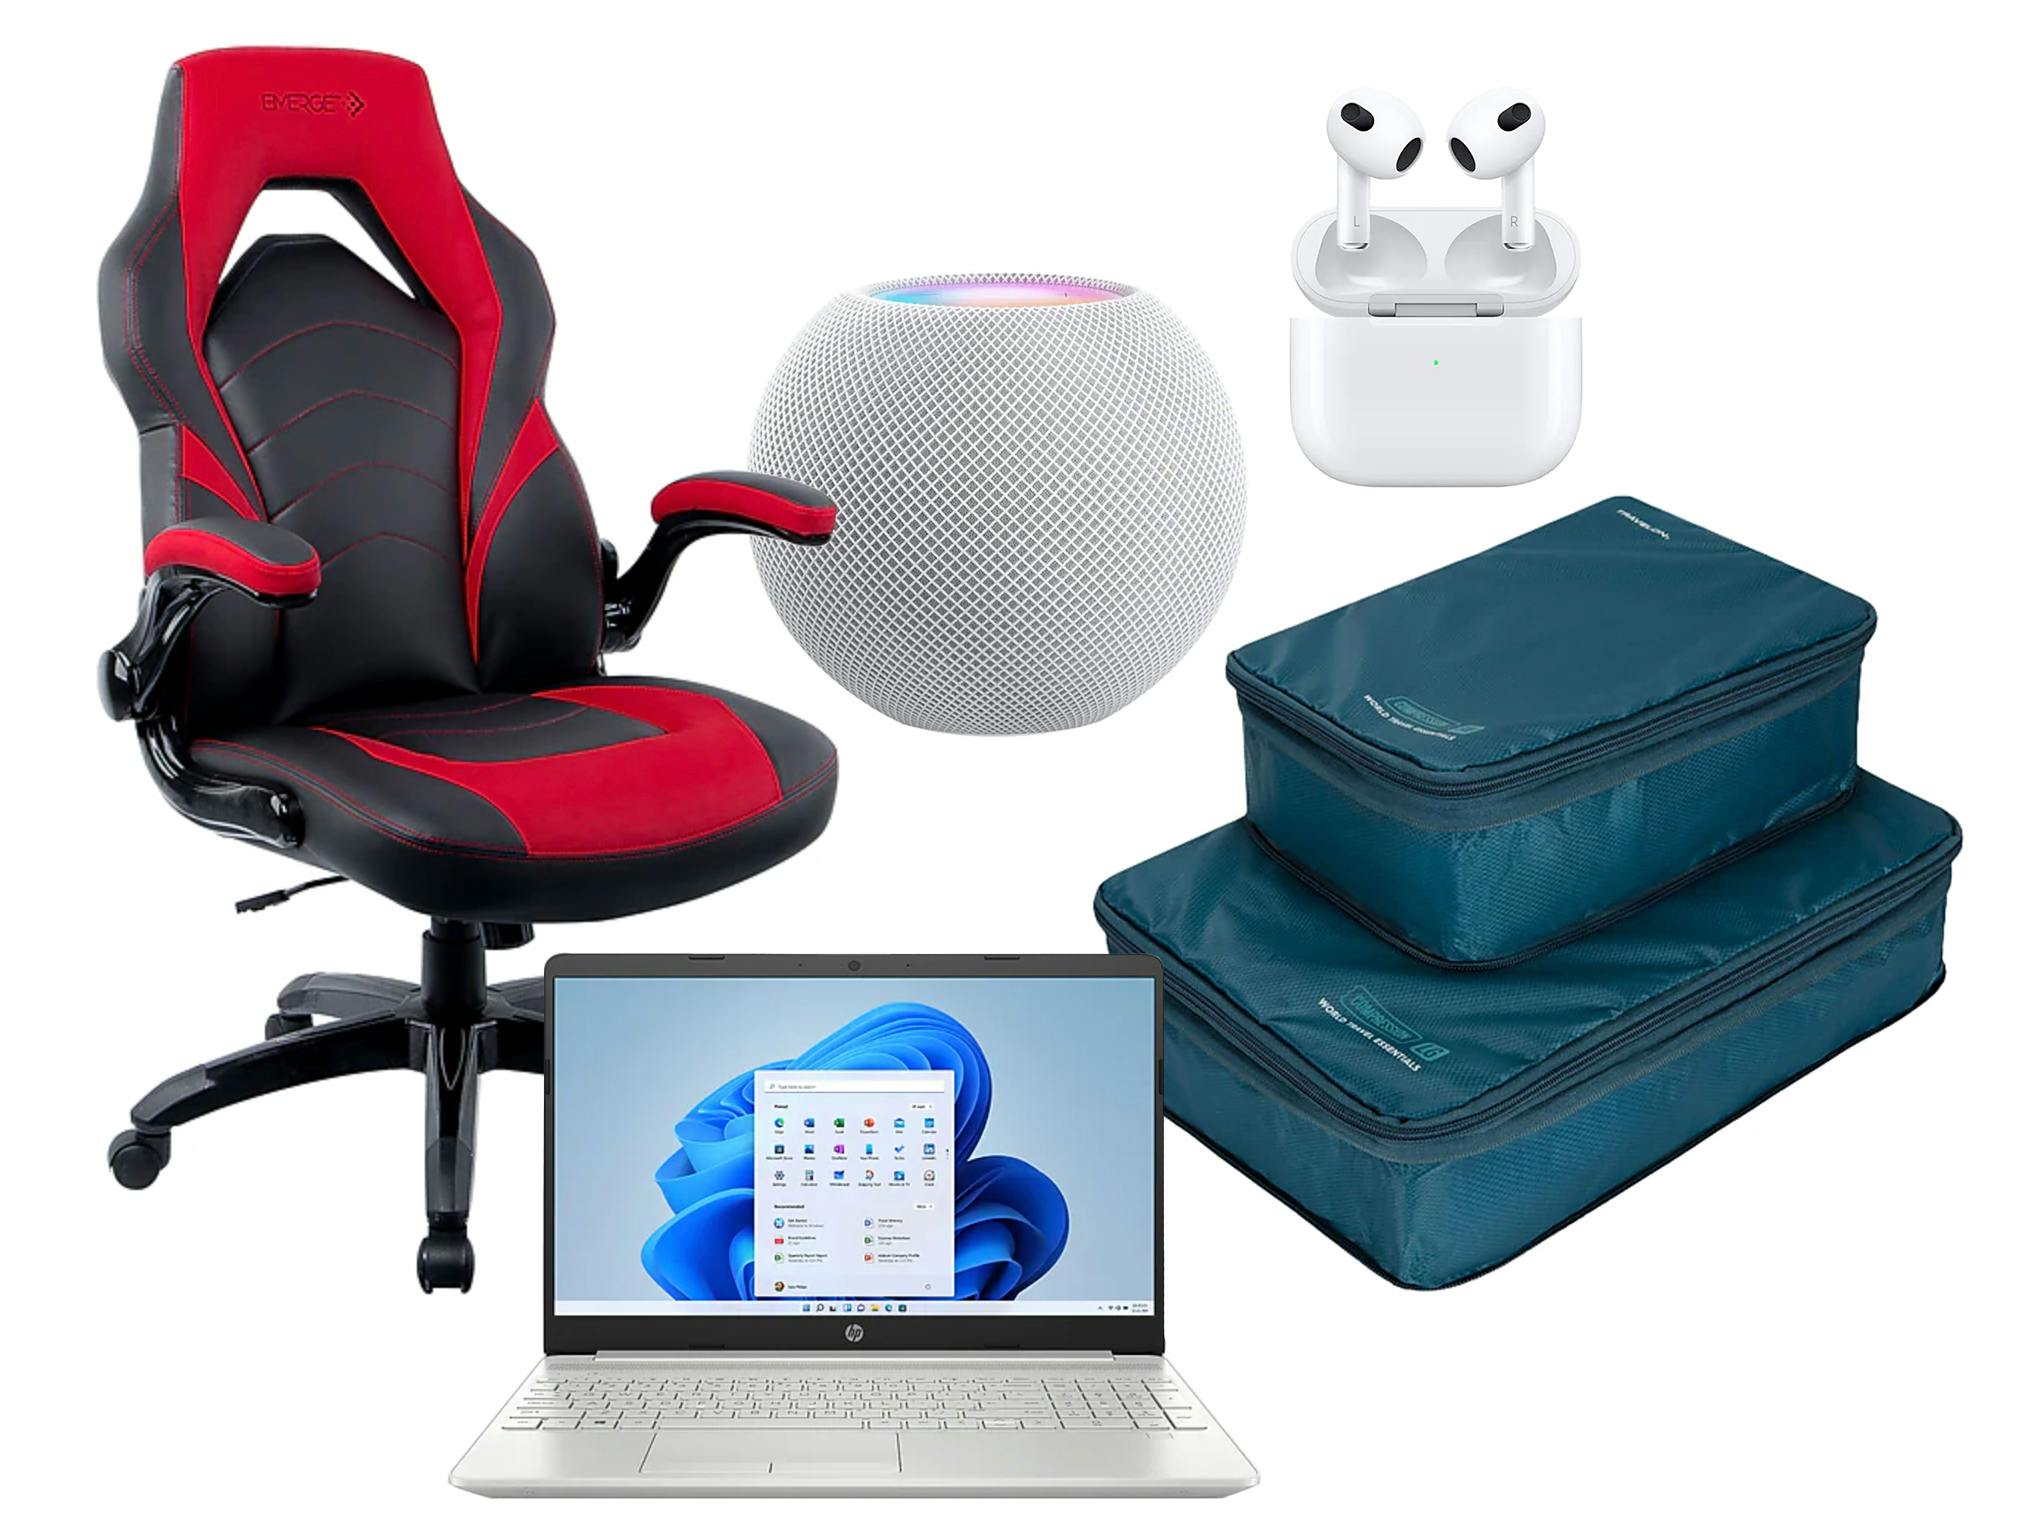 staples black friday deals on gaming chair, laptop, travelon space-saing bags, airpods, and apple homepod mini speaker